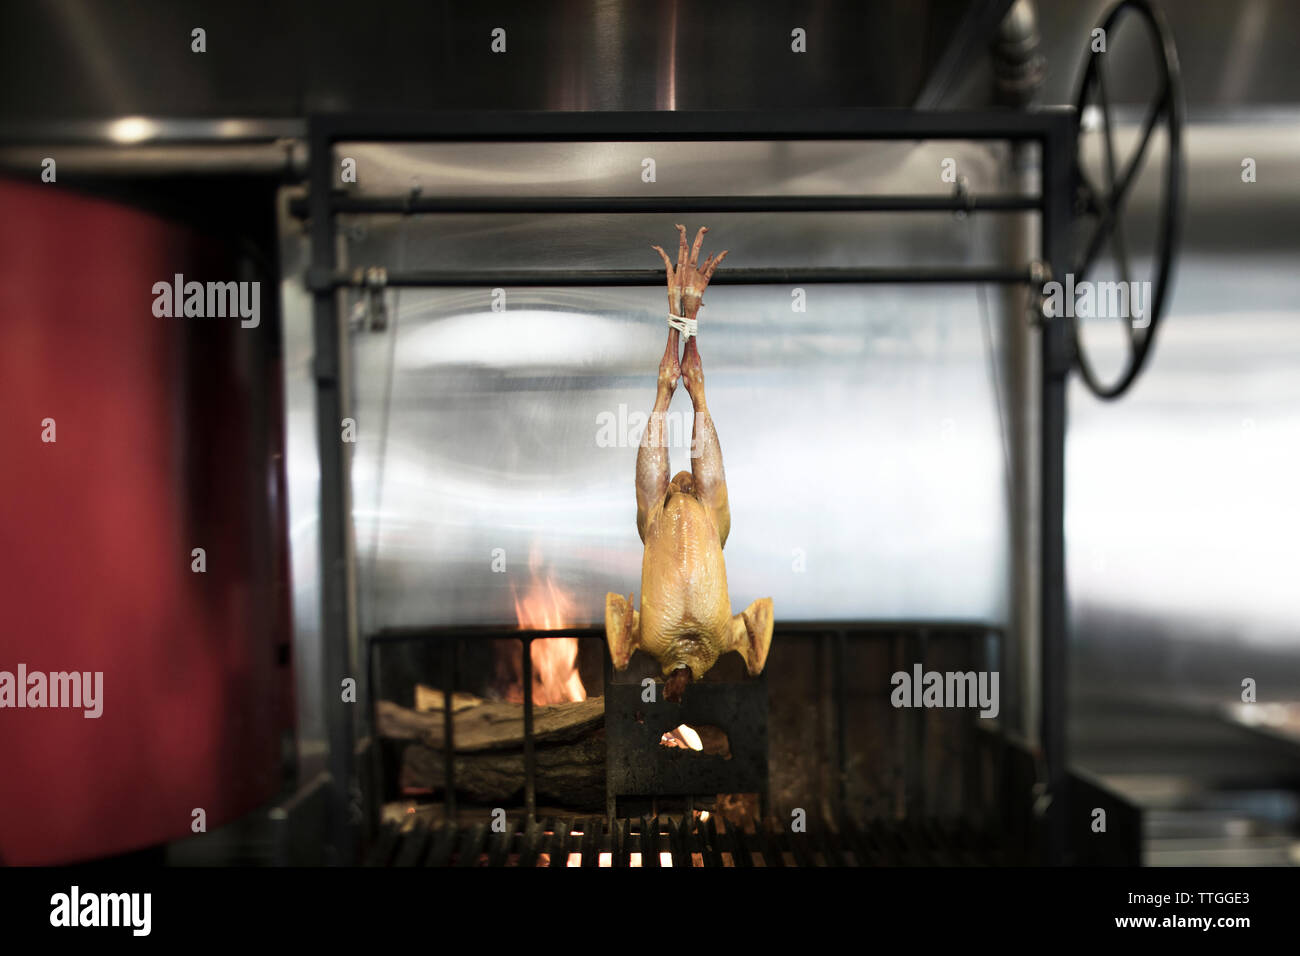 Chicken meat hanging over barbecue grill Stock Photo